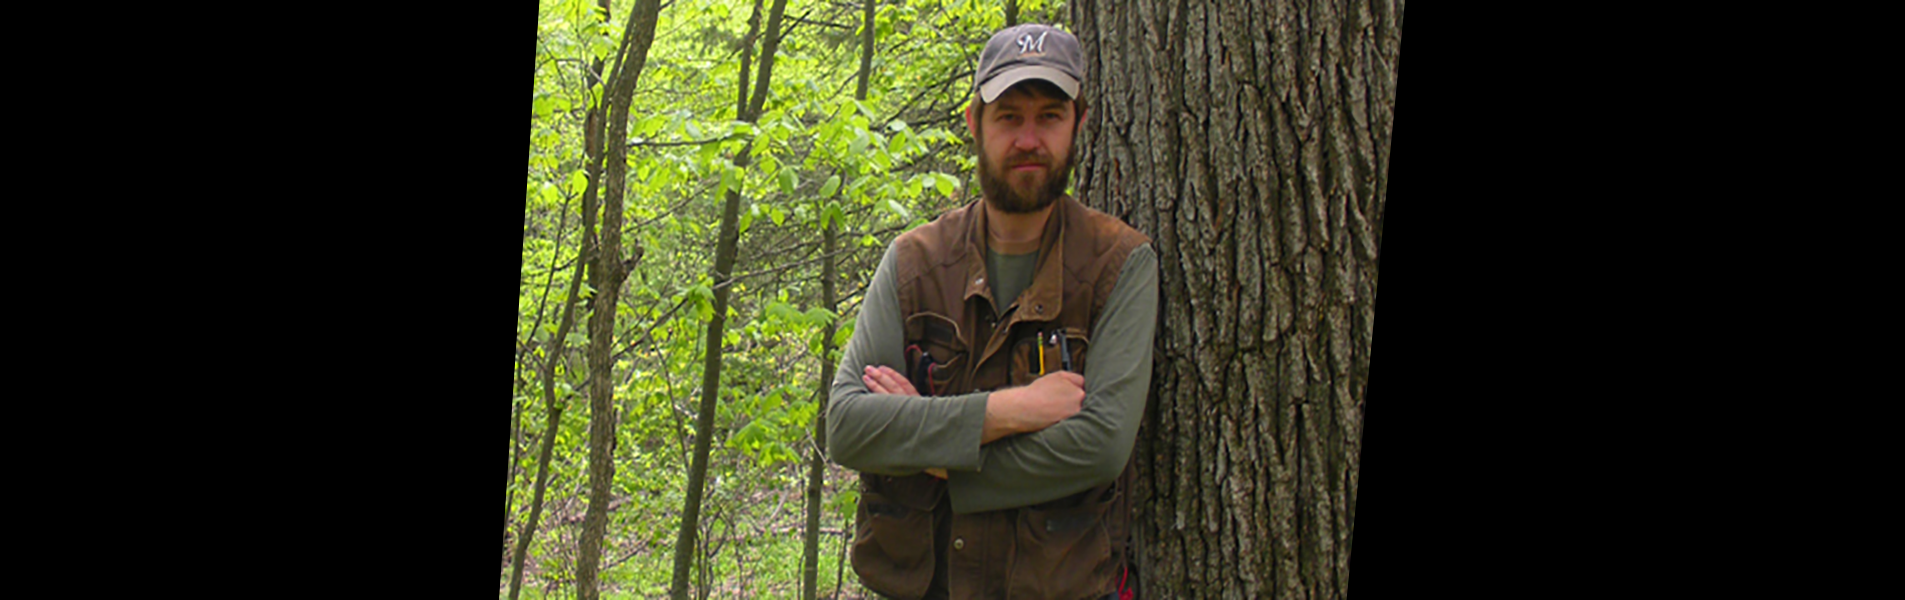 Andrew Meier, alumni, standing by tree in forest as he shares about his position with the US Army Corps of Engineers.